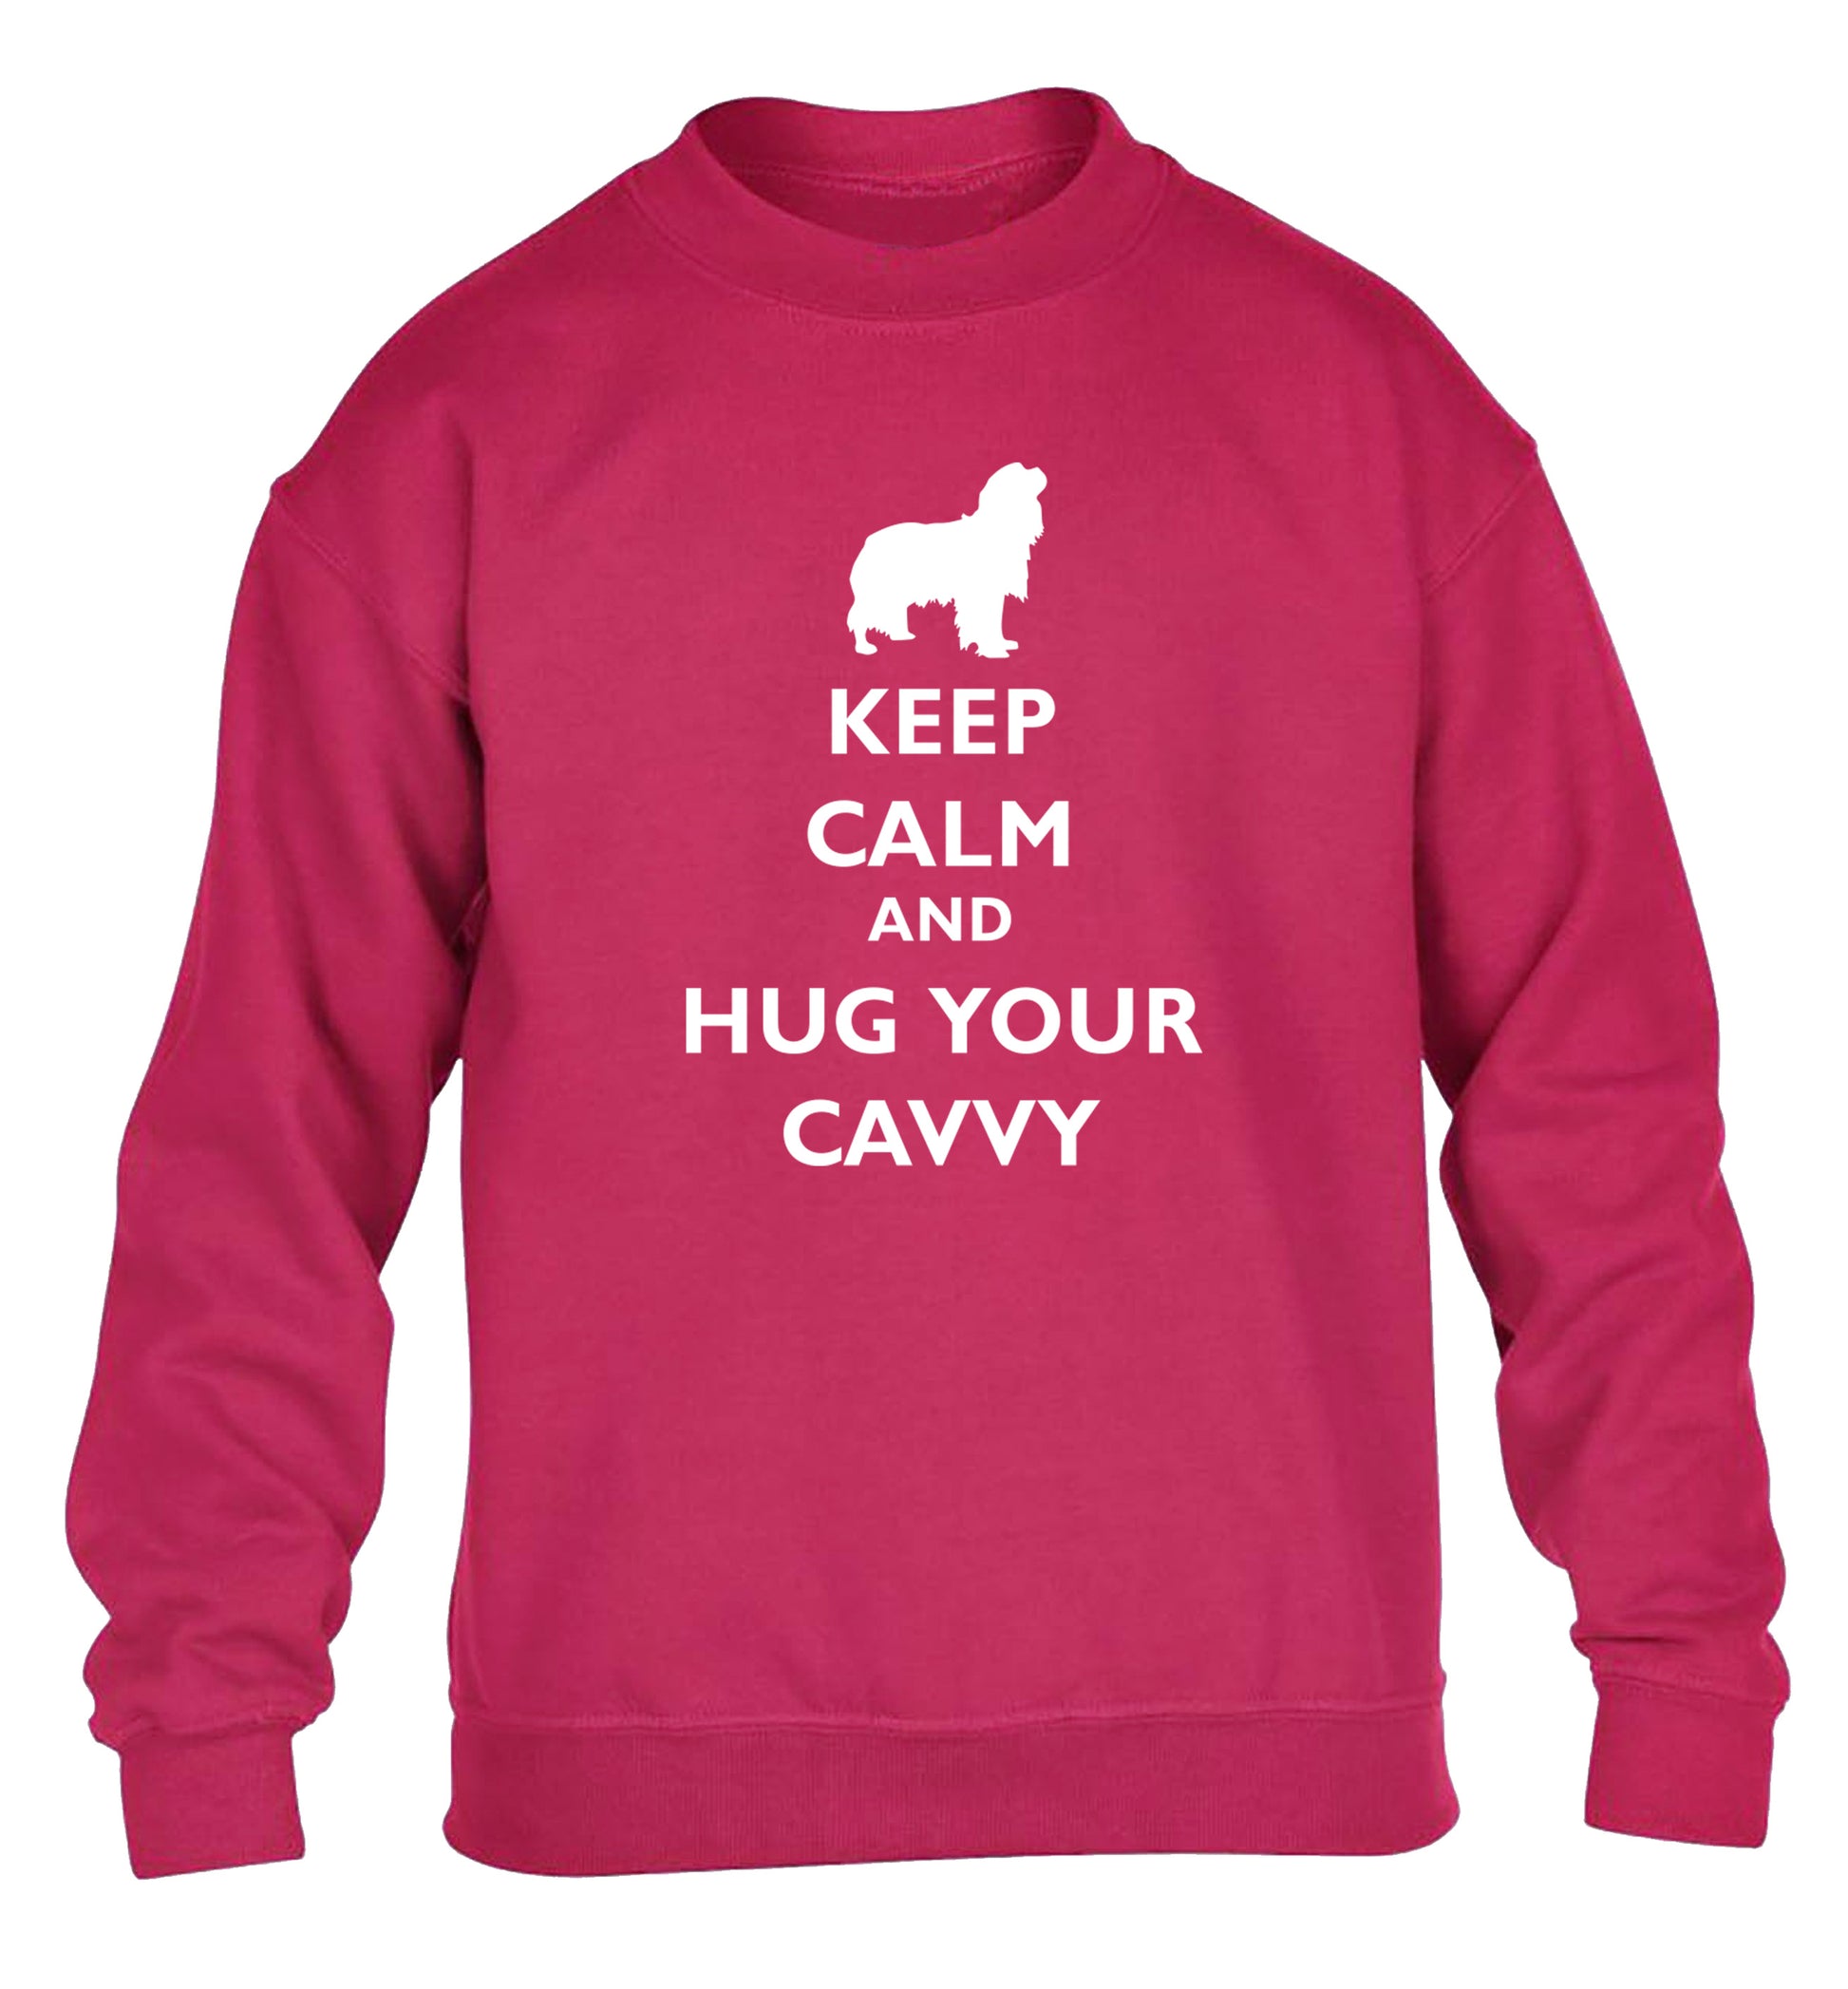 Keep calm and hug your cavvy children's pink sweater 12-13 Years